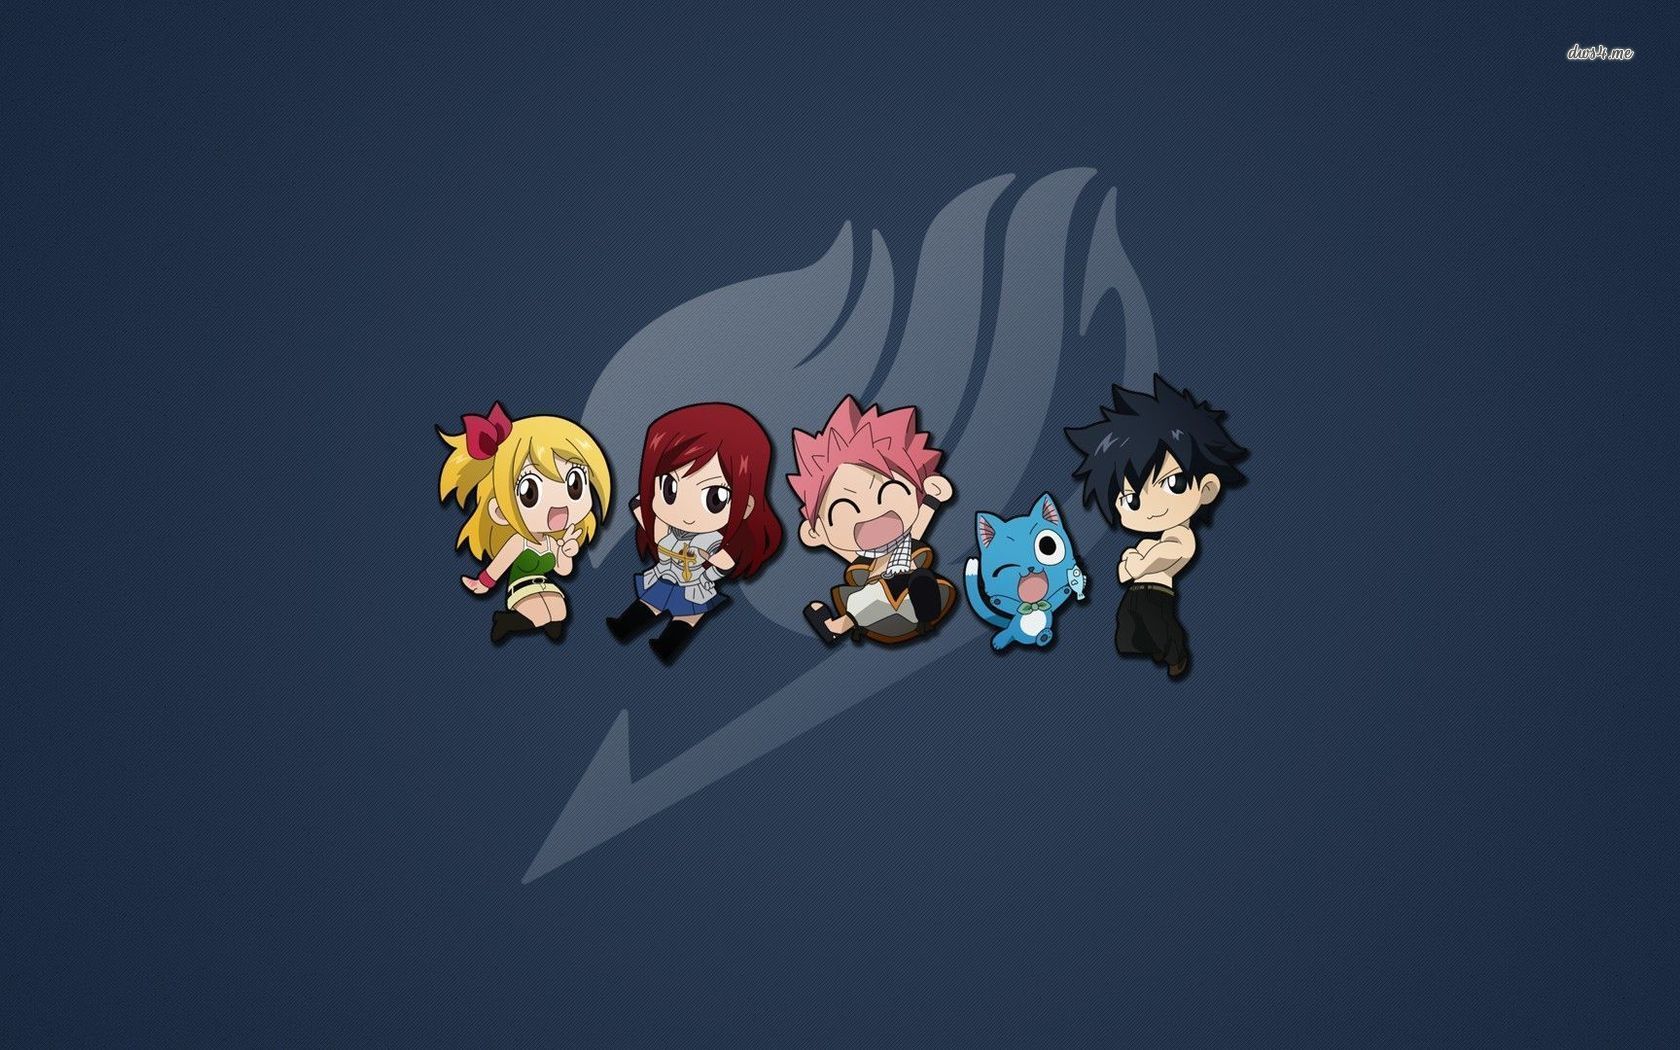 Fairy Tail small characters wallpaper - Anime wallpapers - #48617